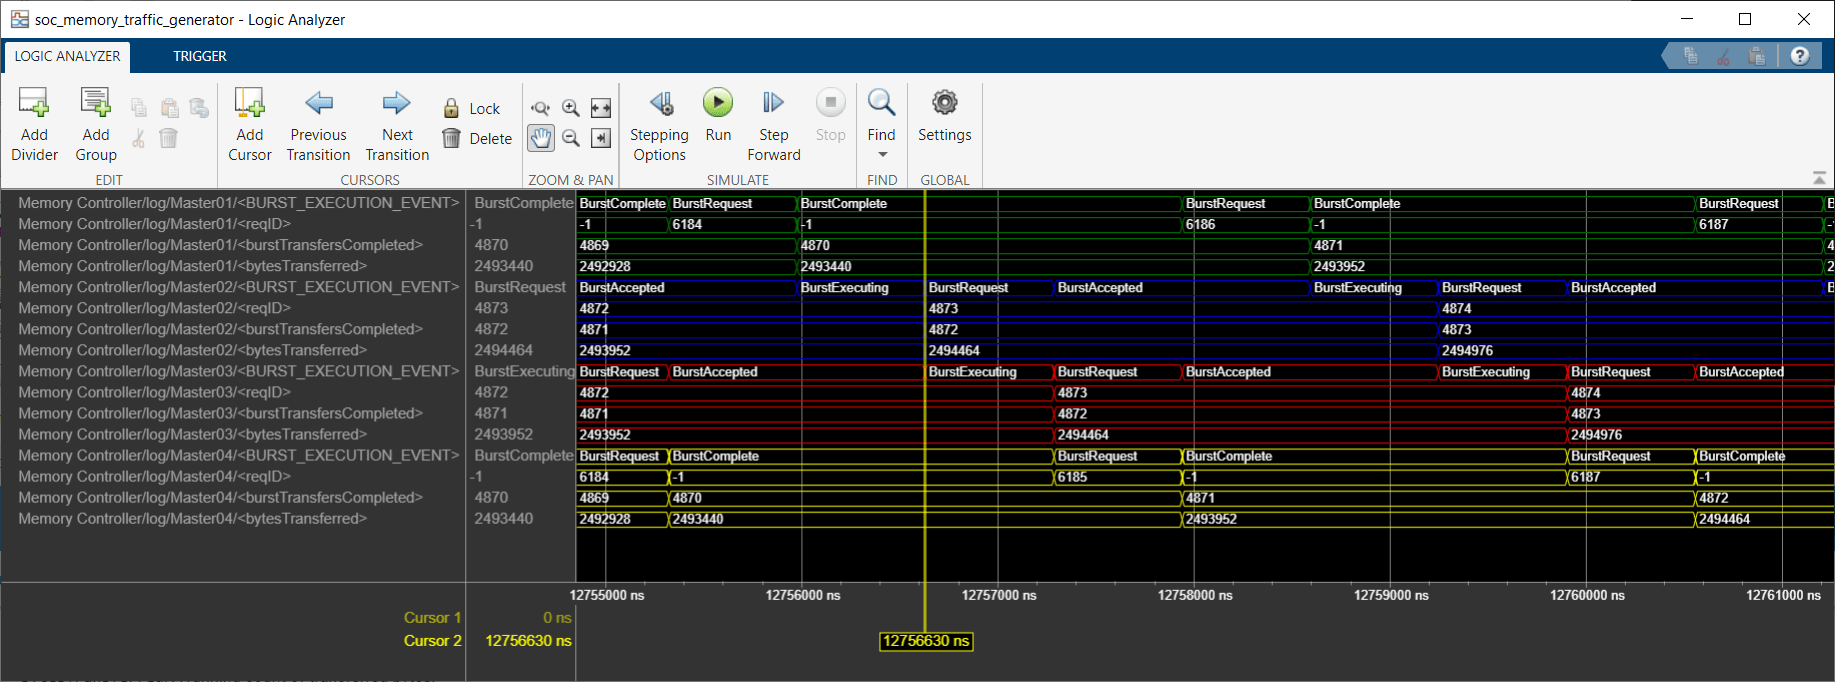 Logic Analyzer displaying waveforms of four Traffic Generator blocks, with the "Show Memory Controller Ports" parameter cleared. For each Traffic Generator, the analyzer shows waves for BURST_EXECUTION_EVENT, reqID, burstTransferCompleted, and bytesTransferred.